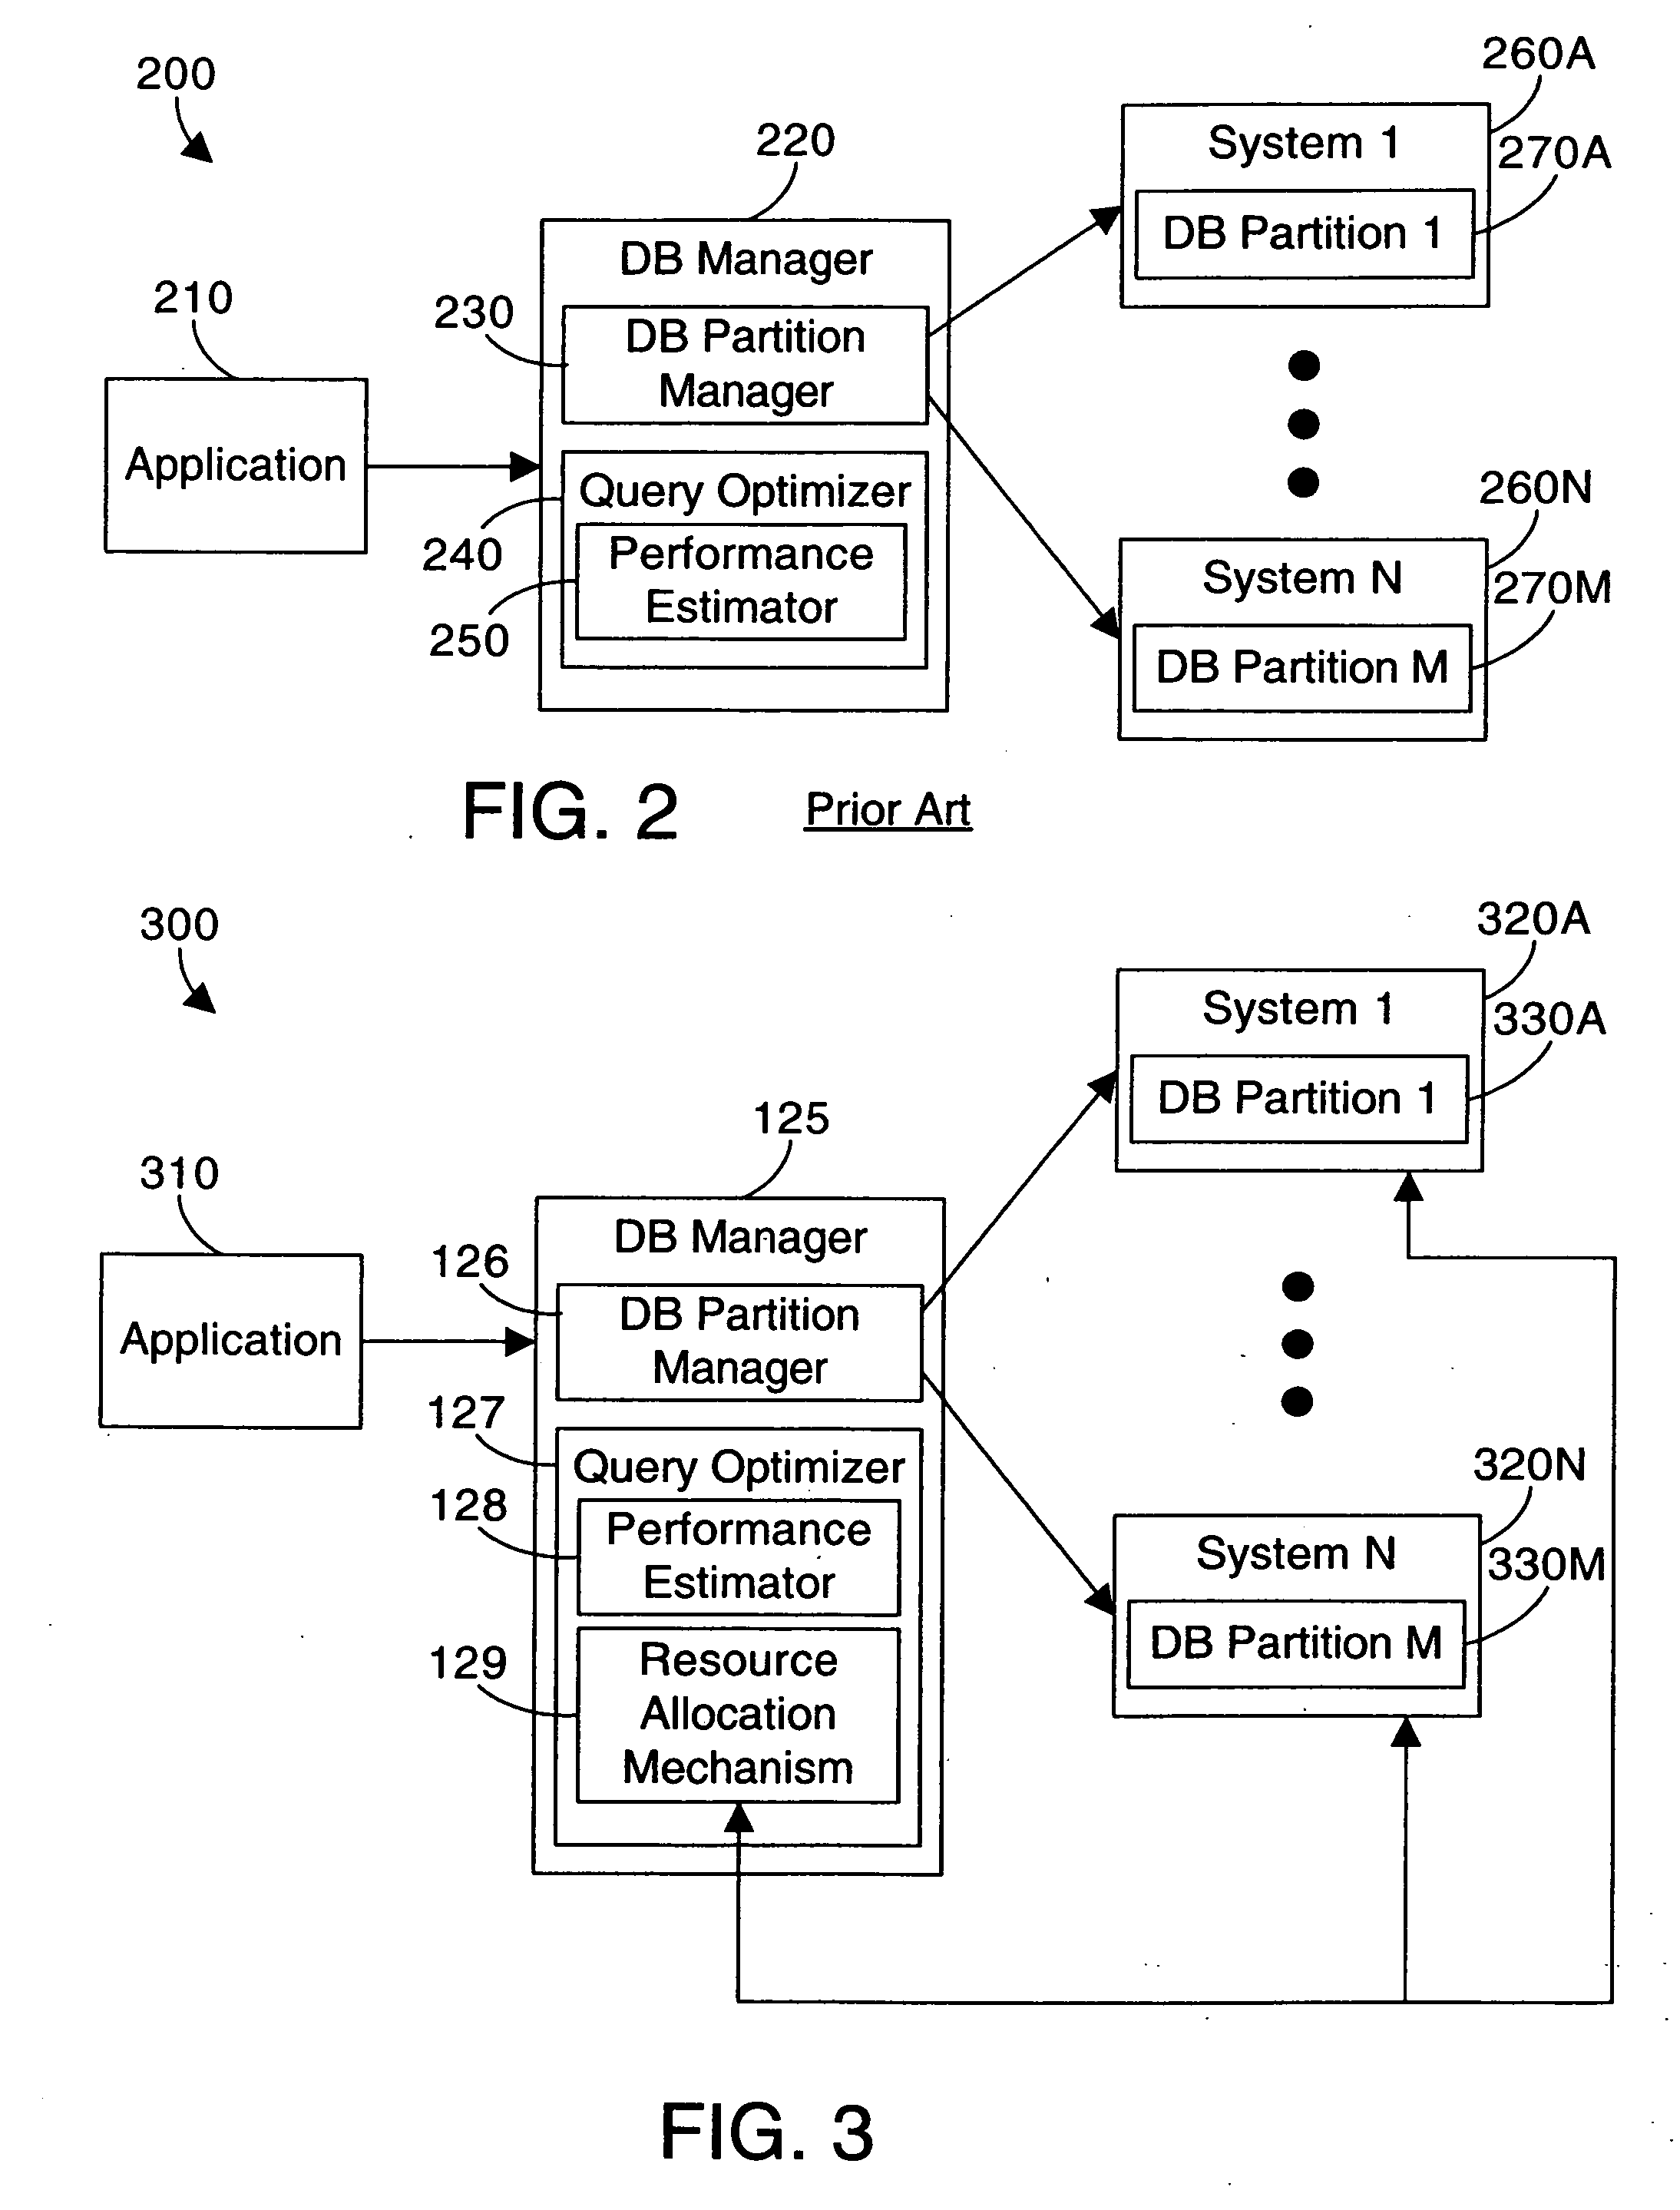 Apparatus and method for autonomic adjustment of resources in a logical partition to improve partitioned query performance